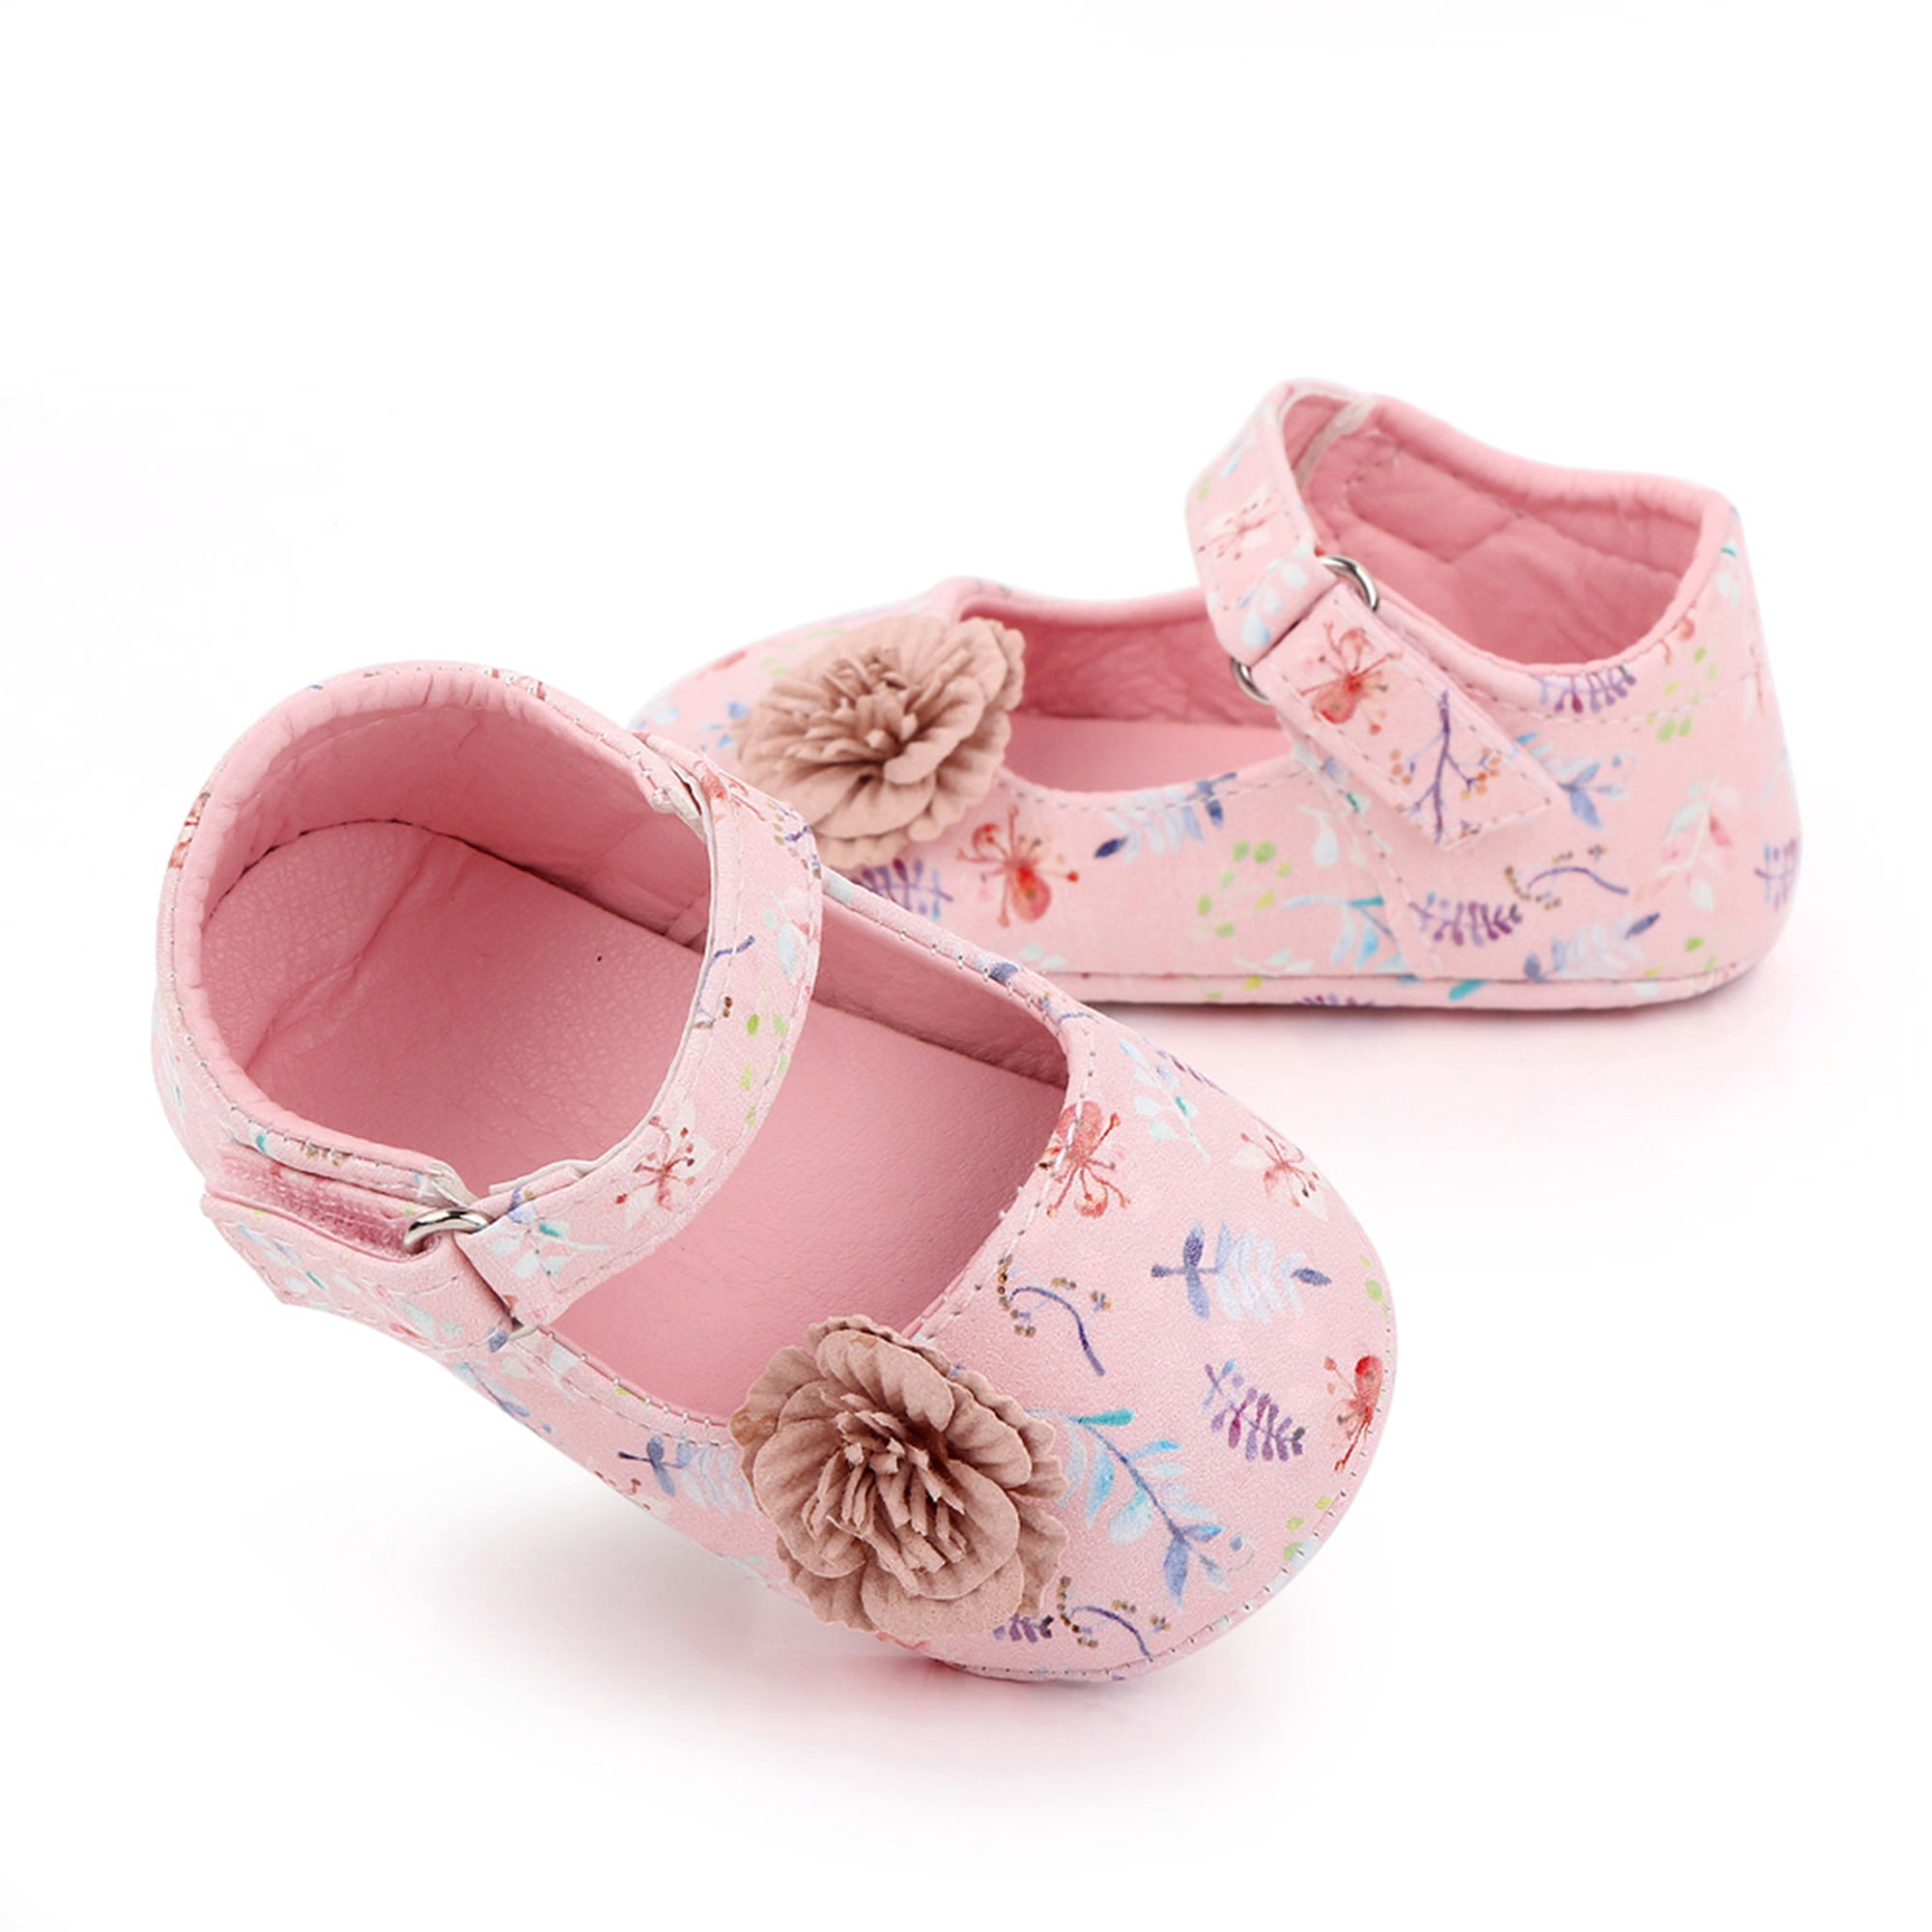 Baby Shoes Non-Slip Soft Sole Leather Flats First Walkers Newborn Babe Girls Floral Casual Princess Shoes